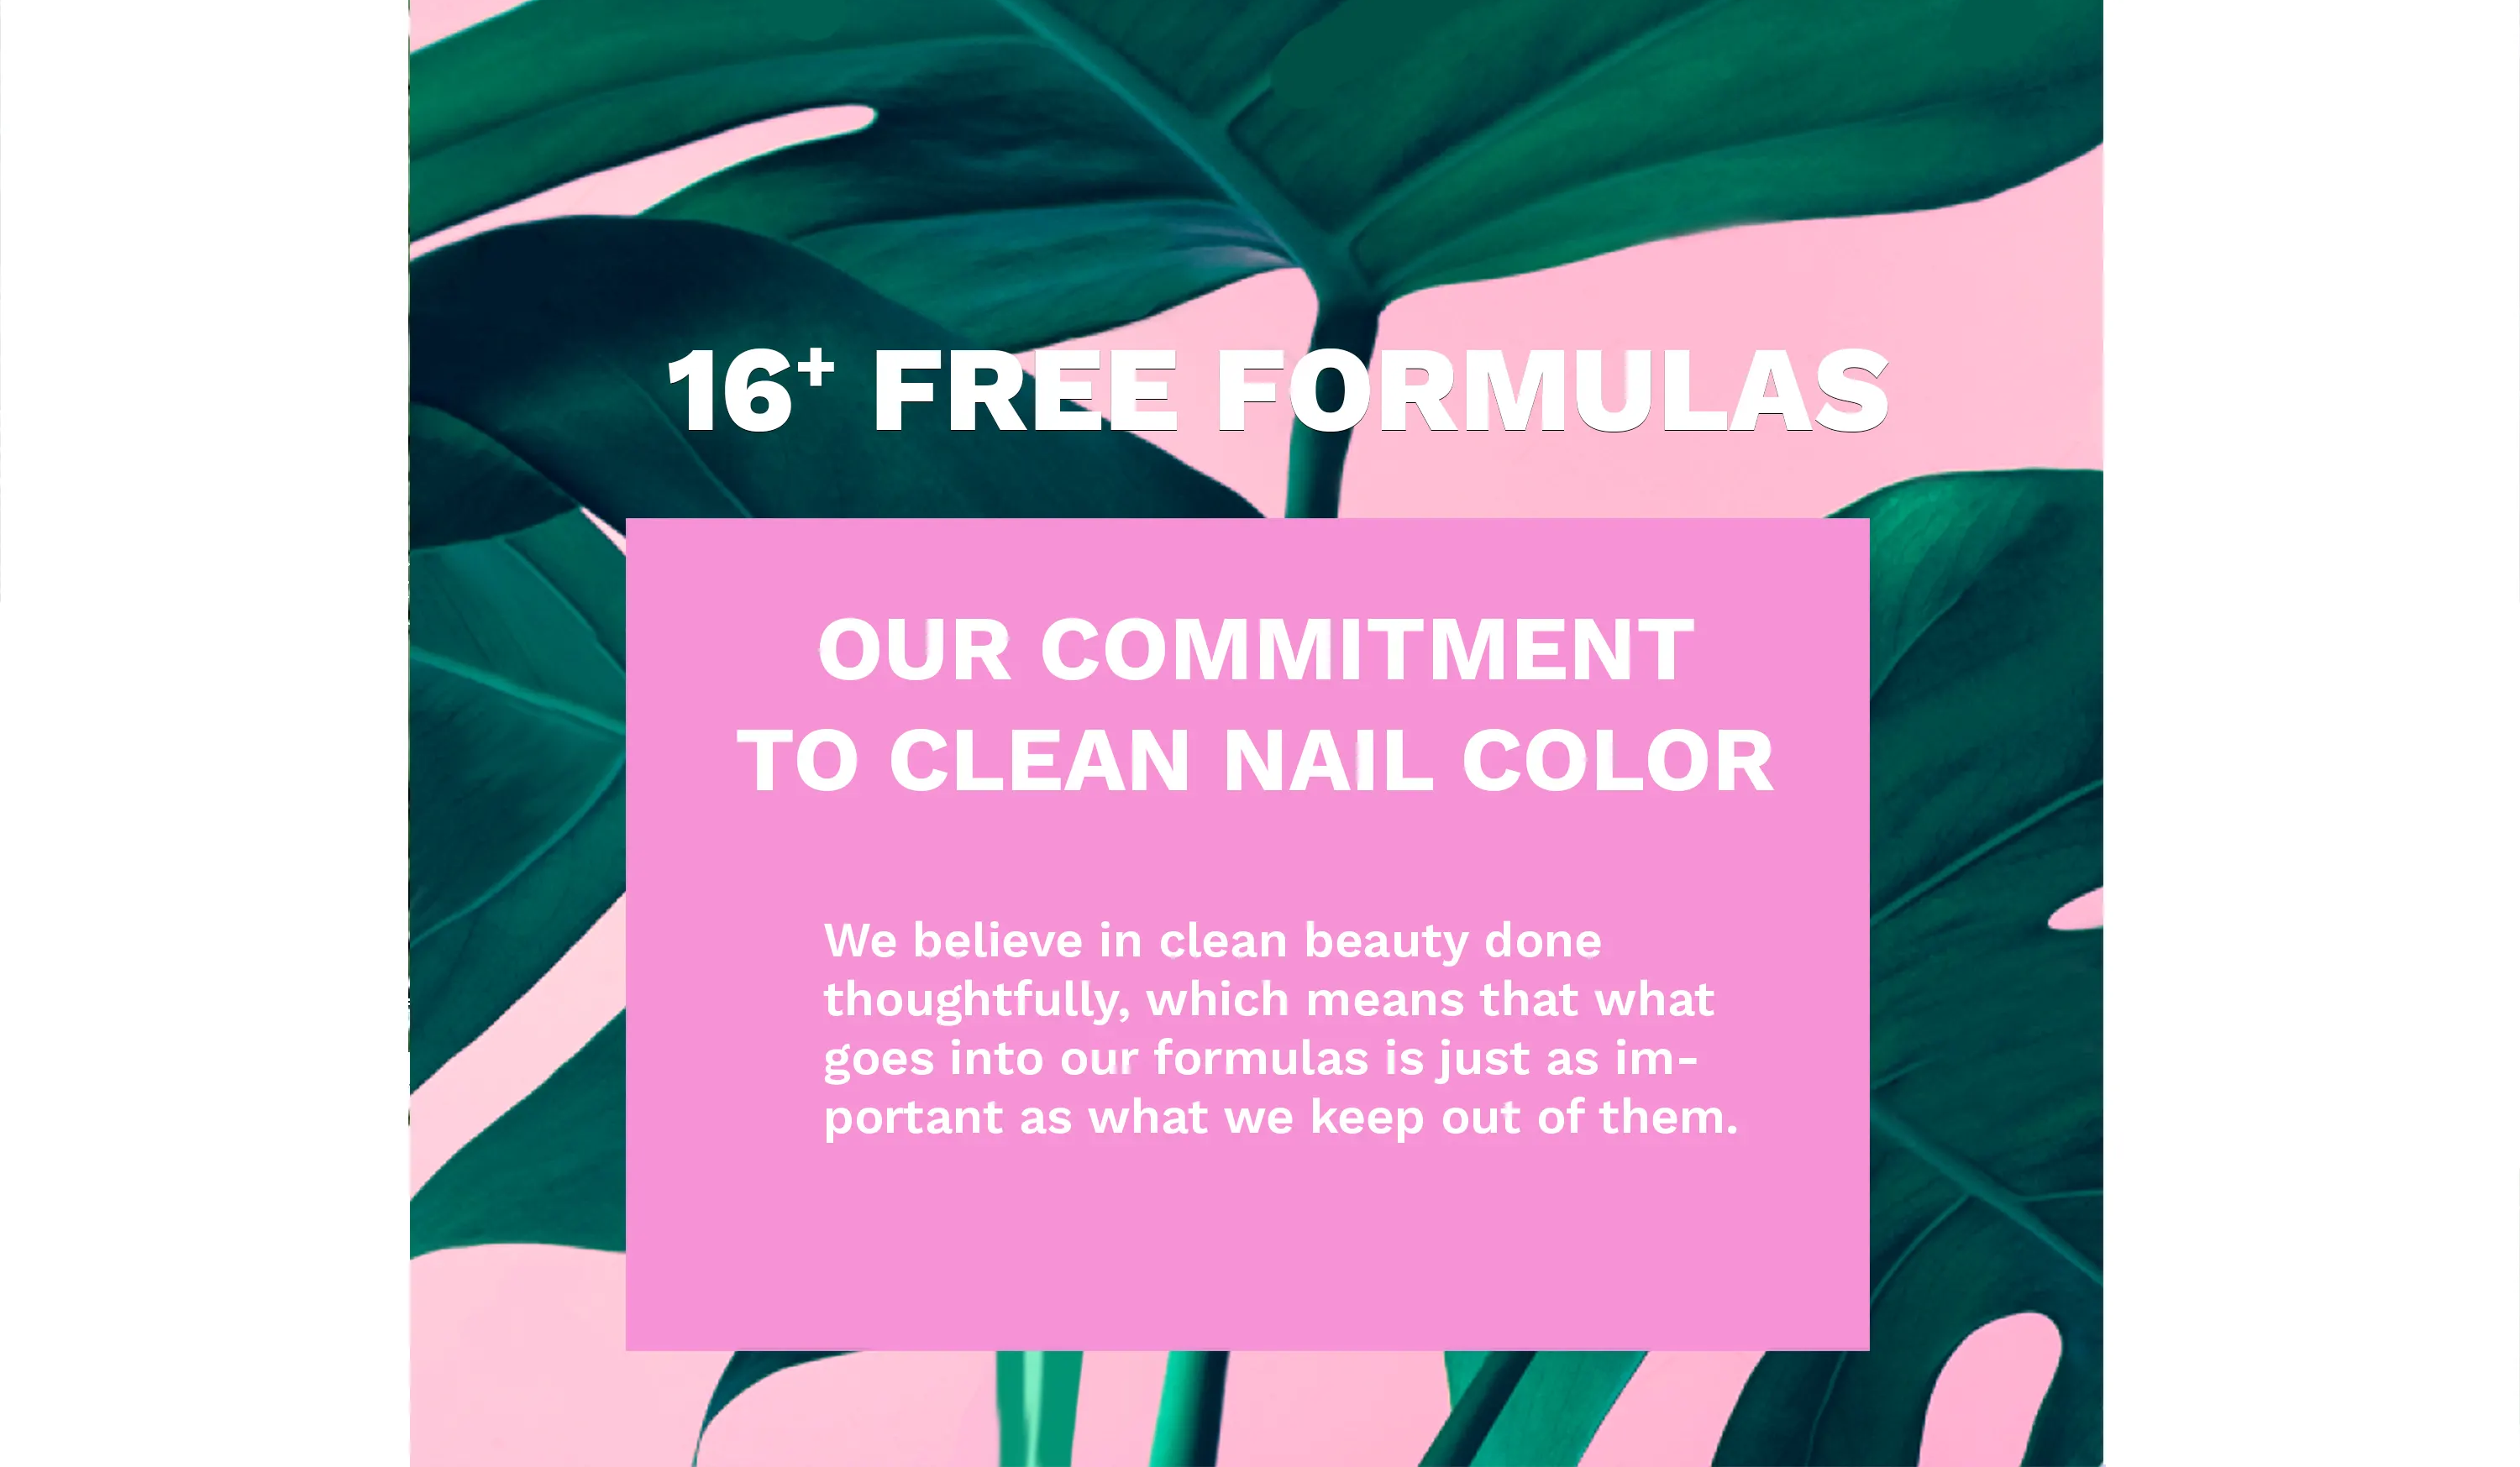 16+ FREE FORMULAS - Our Commitment to clean Nail Color and Care.